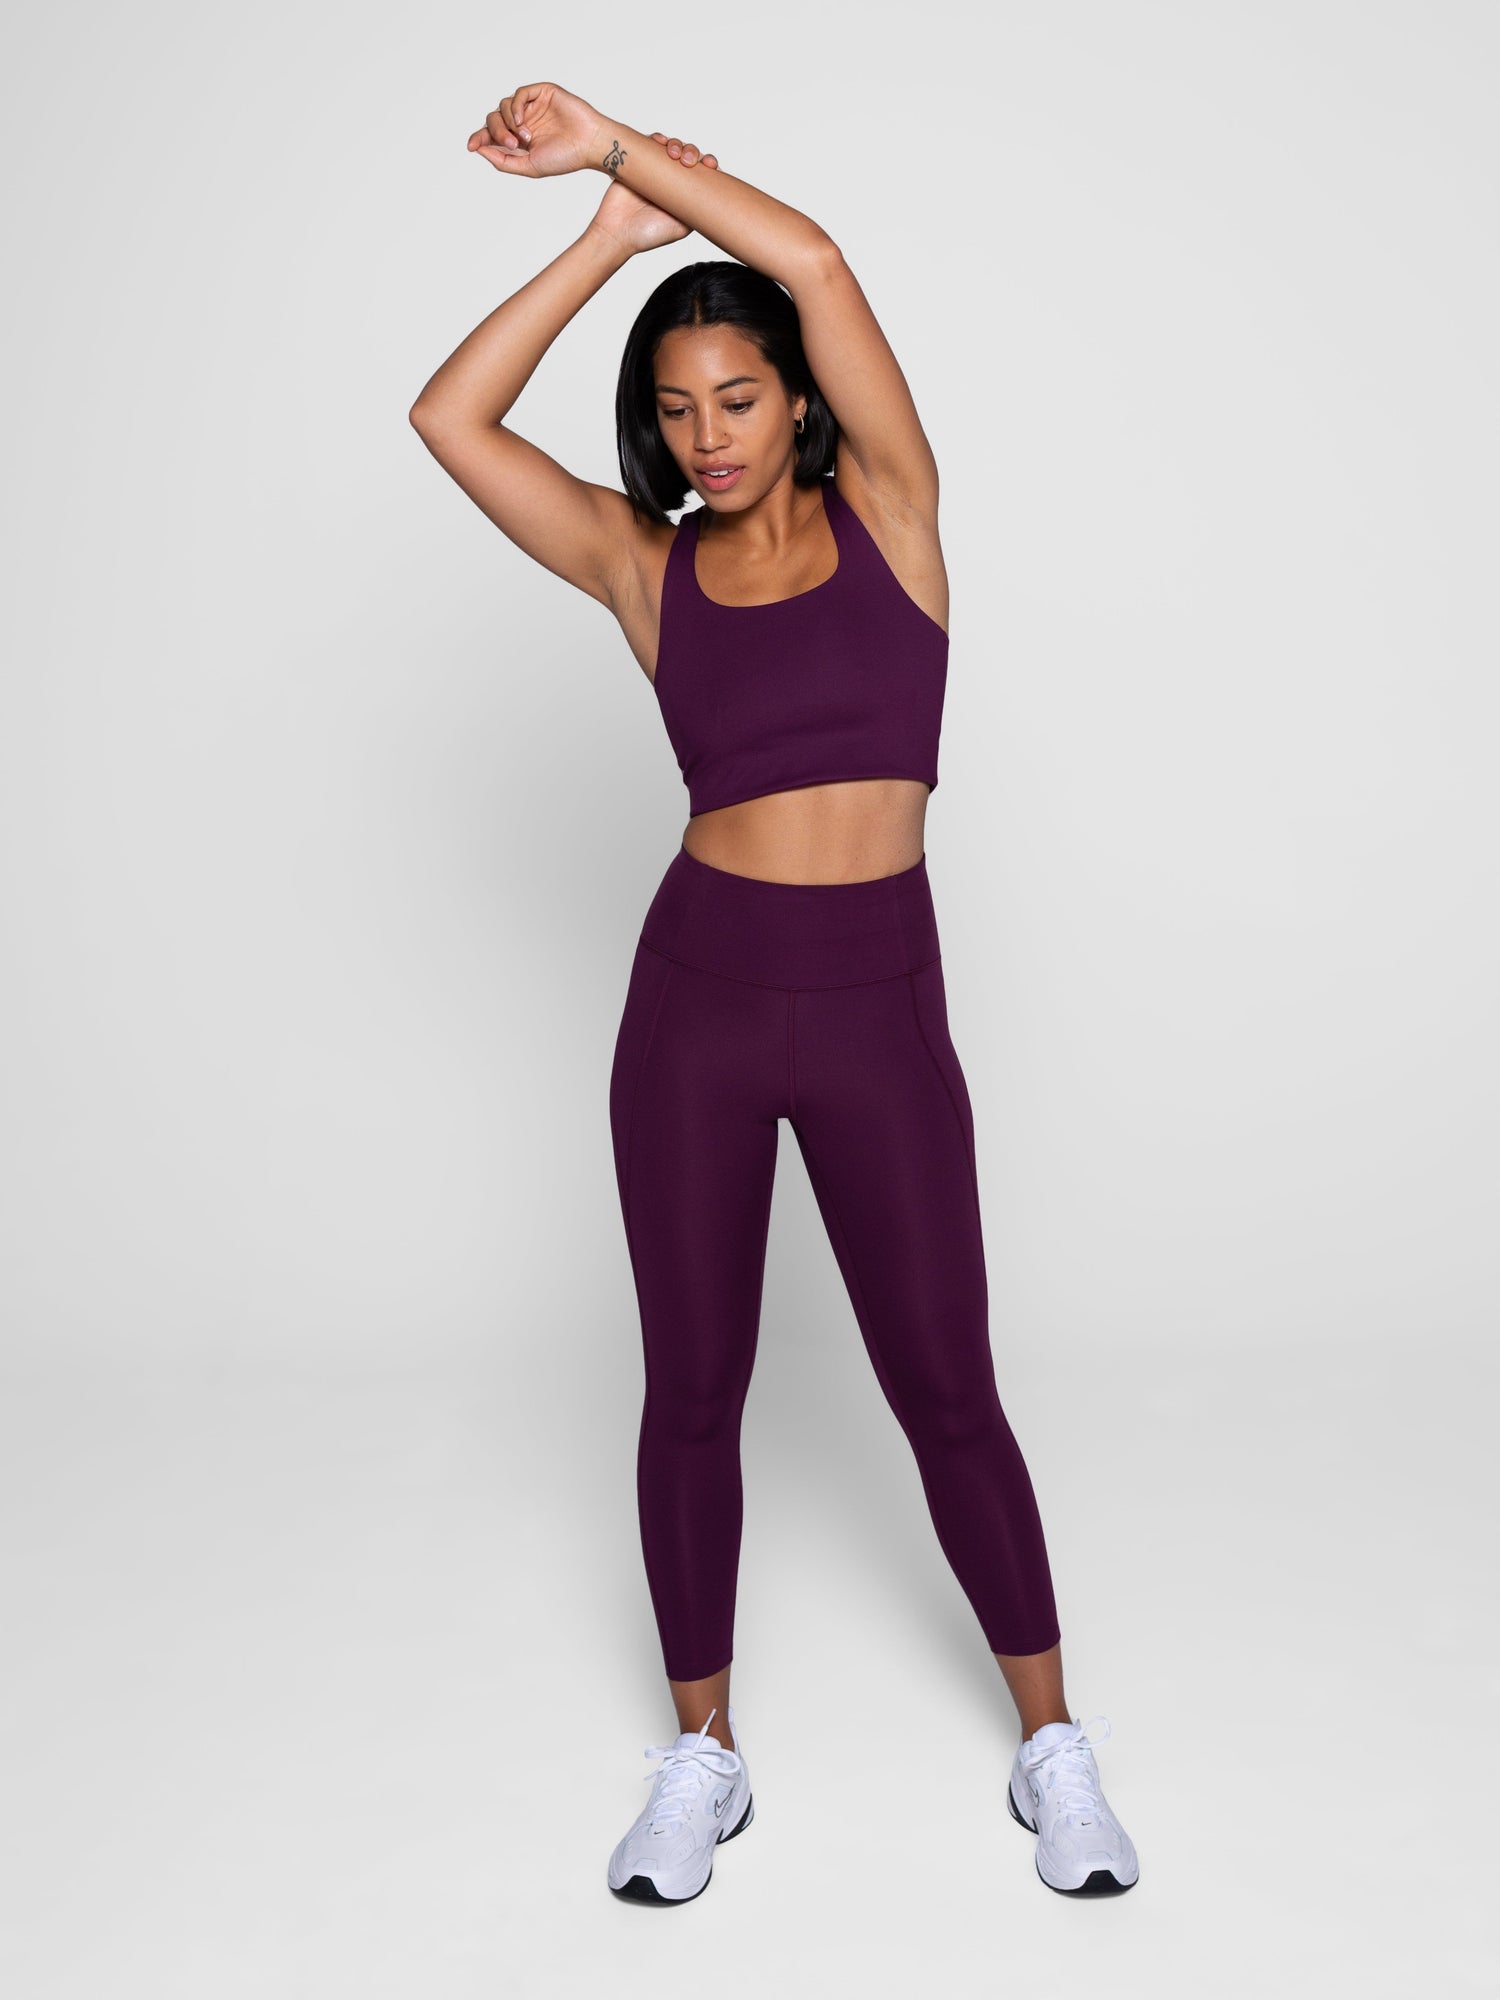 Girlfriend Collective Paloma Classic Sports Bra - Made from recycled plastic bottles Plum Underwear